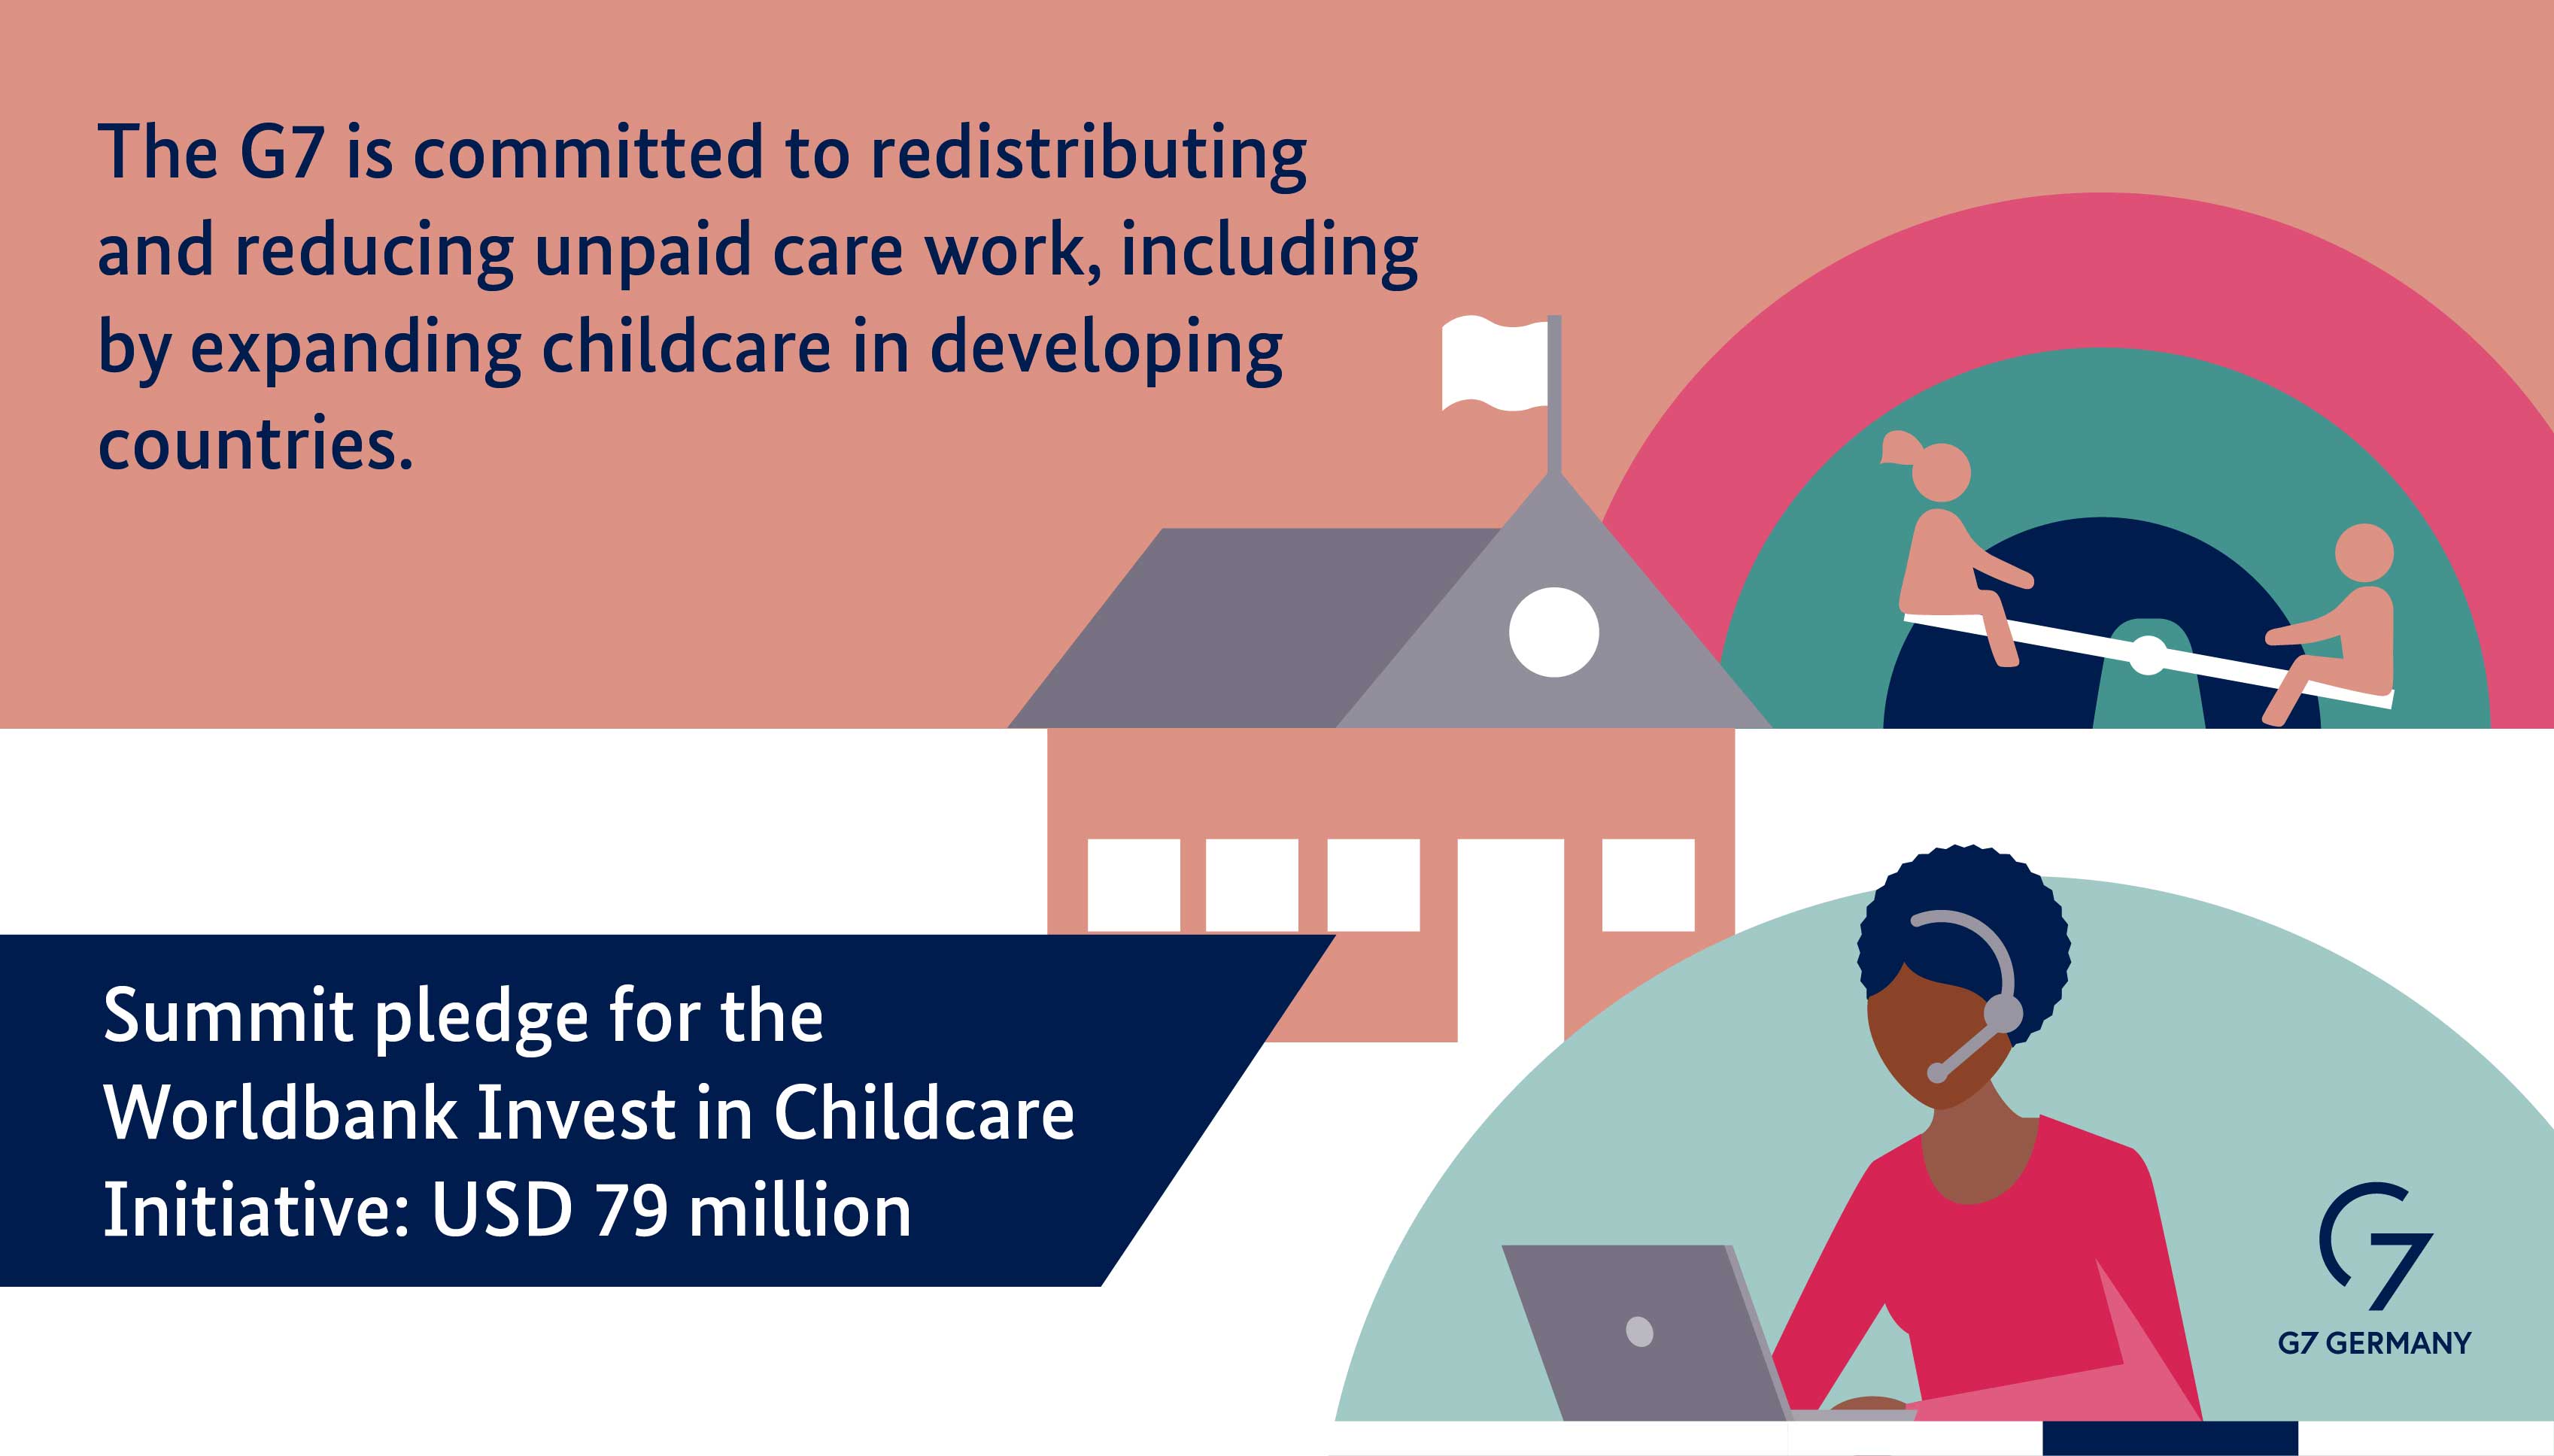 The G7 is committed to redistributing and reducing unpaid care work, including by expanding childcare in developing countries. Summit pledge for the World Bank Childcare Incentive Fund: 79 million US dollars